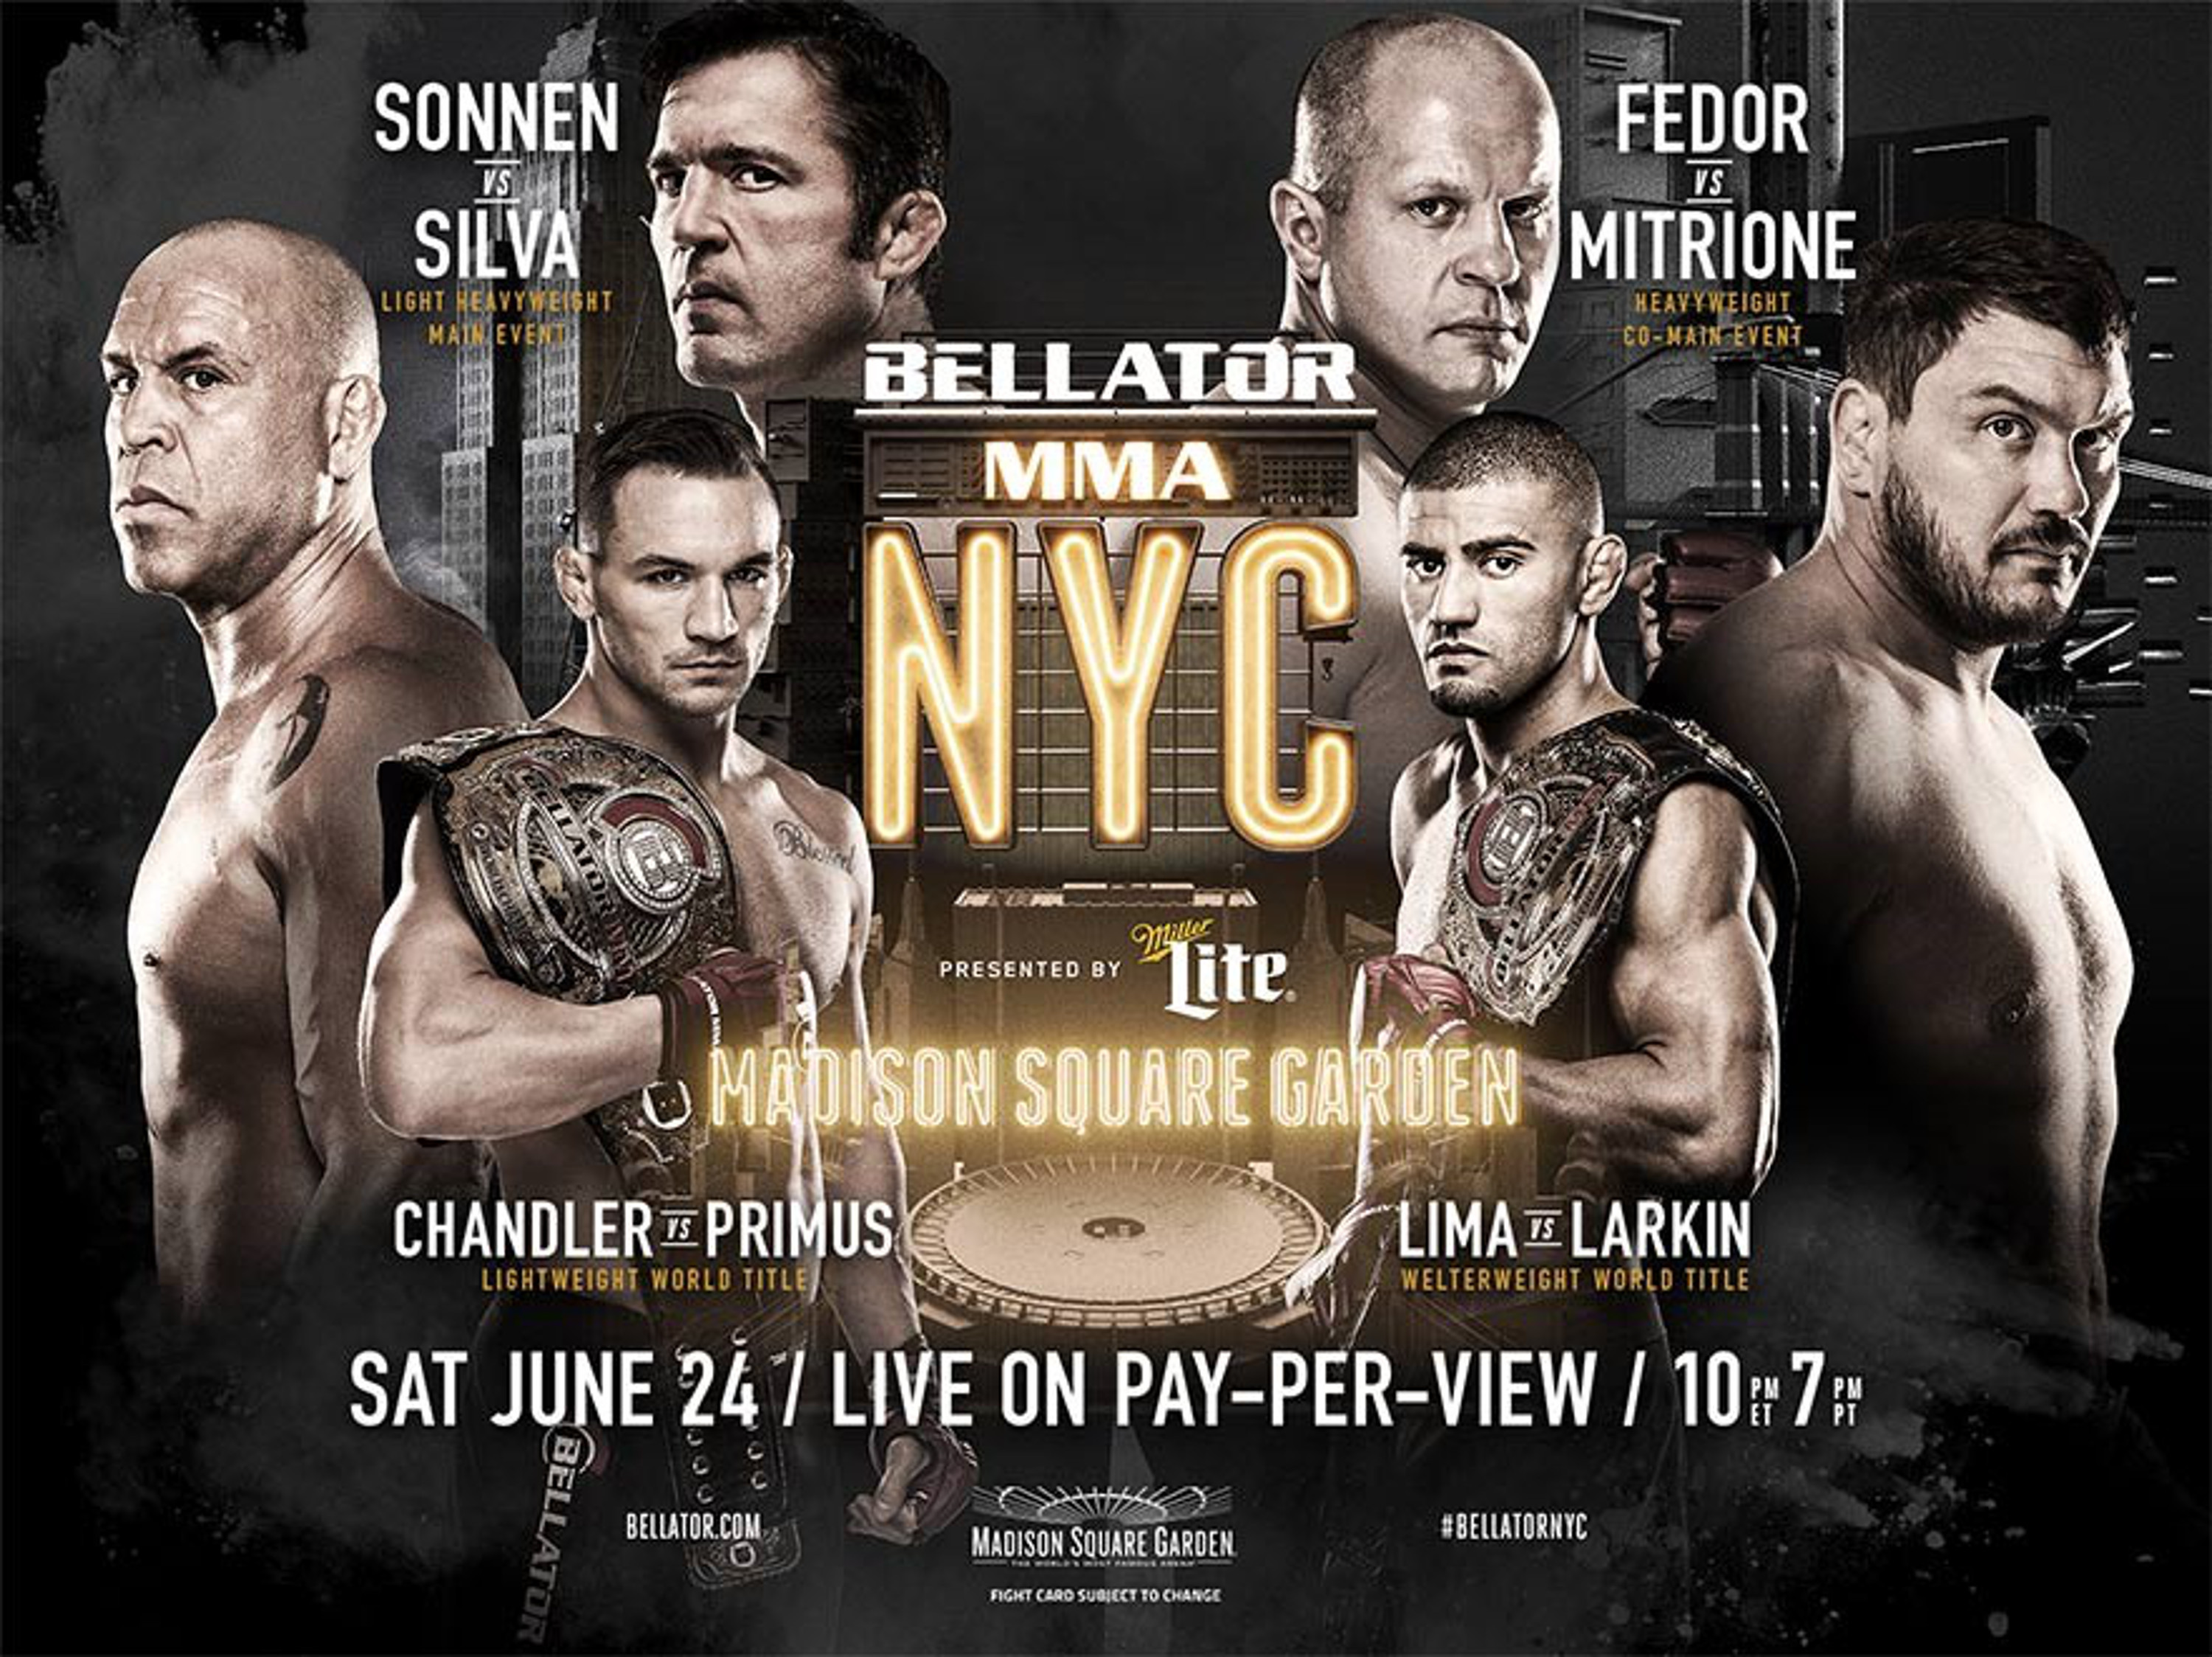 SES Delivers Cables First 4K Live PPV Sports Event With Bellator NYC